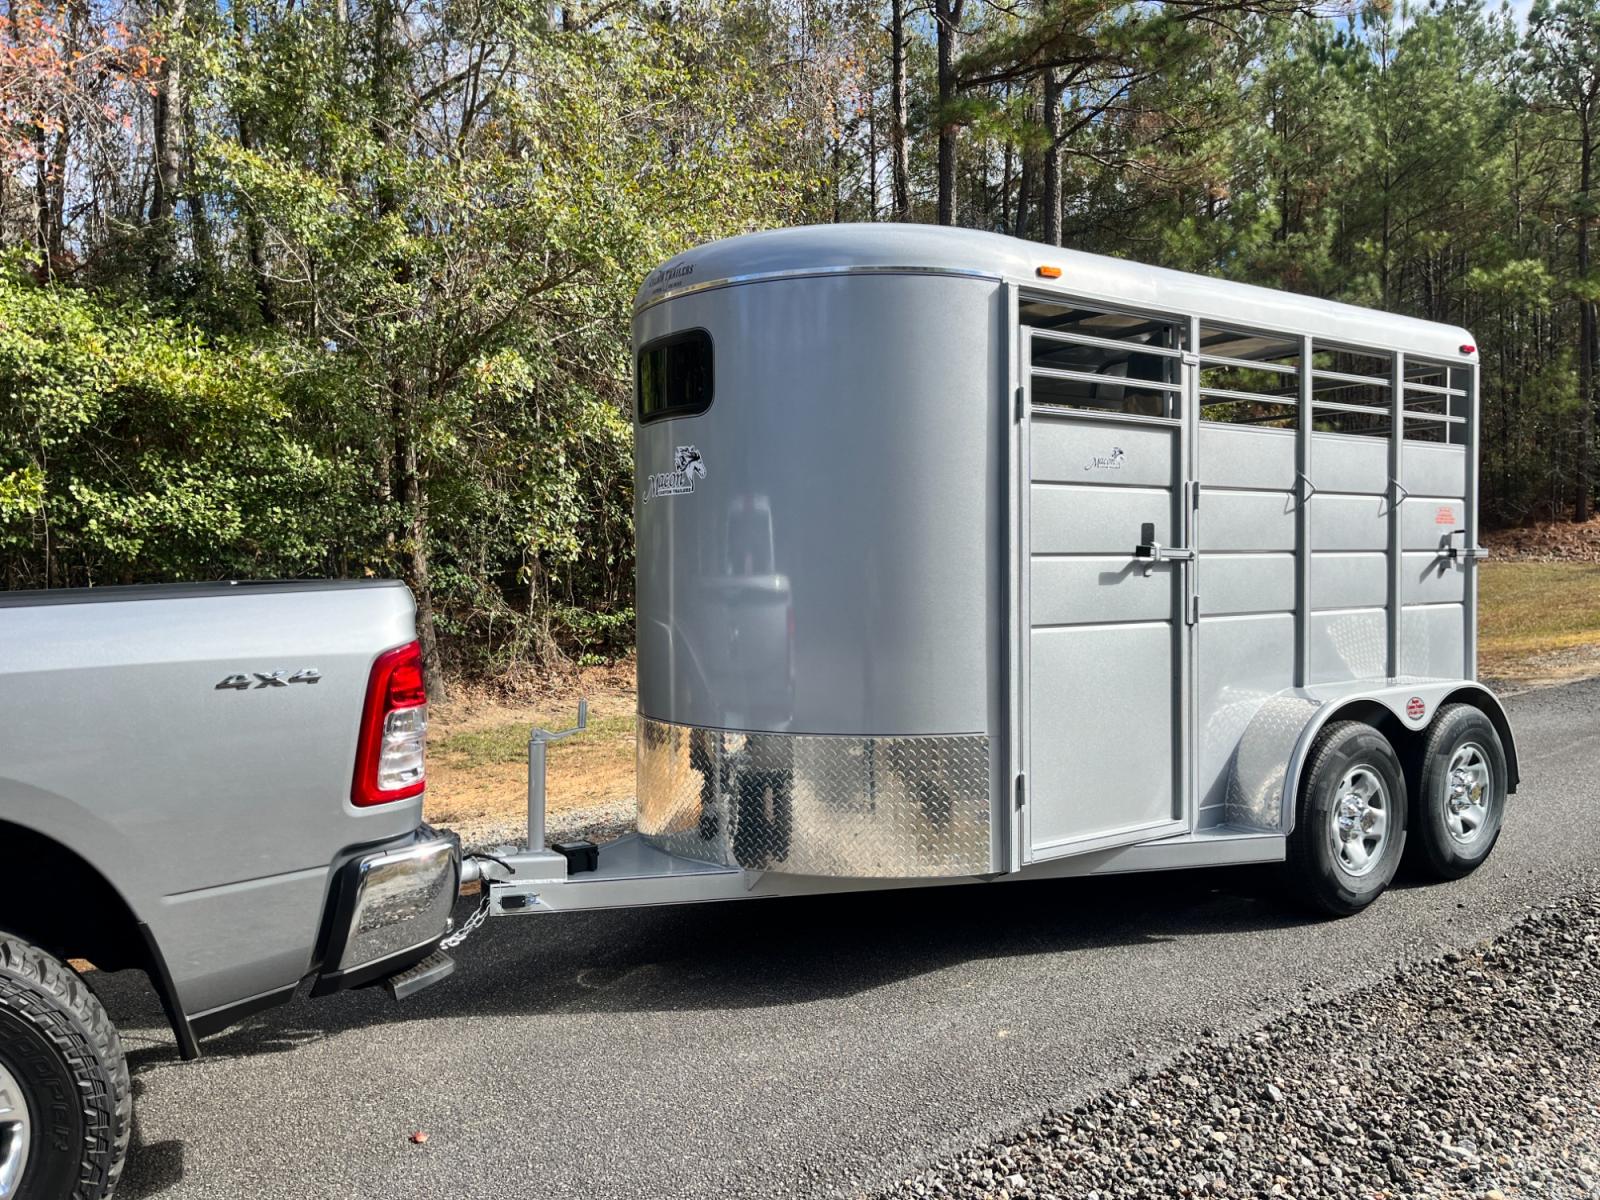 2023 Silver Metallic Calico 2 Horse Slant , located at 1330 Rainey Rd., Macon, 31220, (478) 960-1044, 32.845638, -83.778687 - Brand New 2023 Model 2 Horse Slant Calico Brand Trailer! 6ft Wide X 13ft Long Deluxe Model Tandem Axle Trailer! Easy Close Slant Divider Latch! 16" Radials! Beautiful Silver Metallic Paint is Awesome! Black Pin Striping Looks Fantastic! Fully Caulked Inside and Out to Prevent Rust! The Paint i - Photo #1